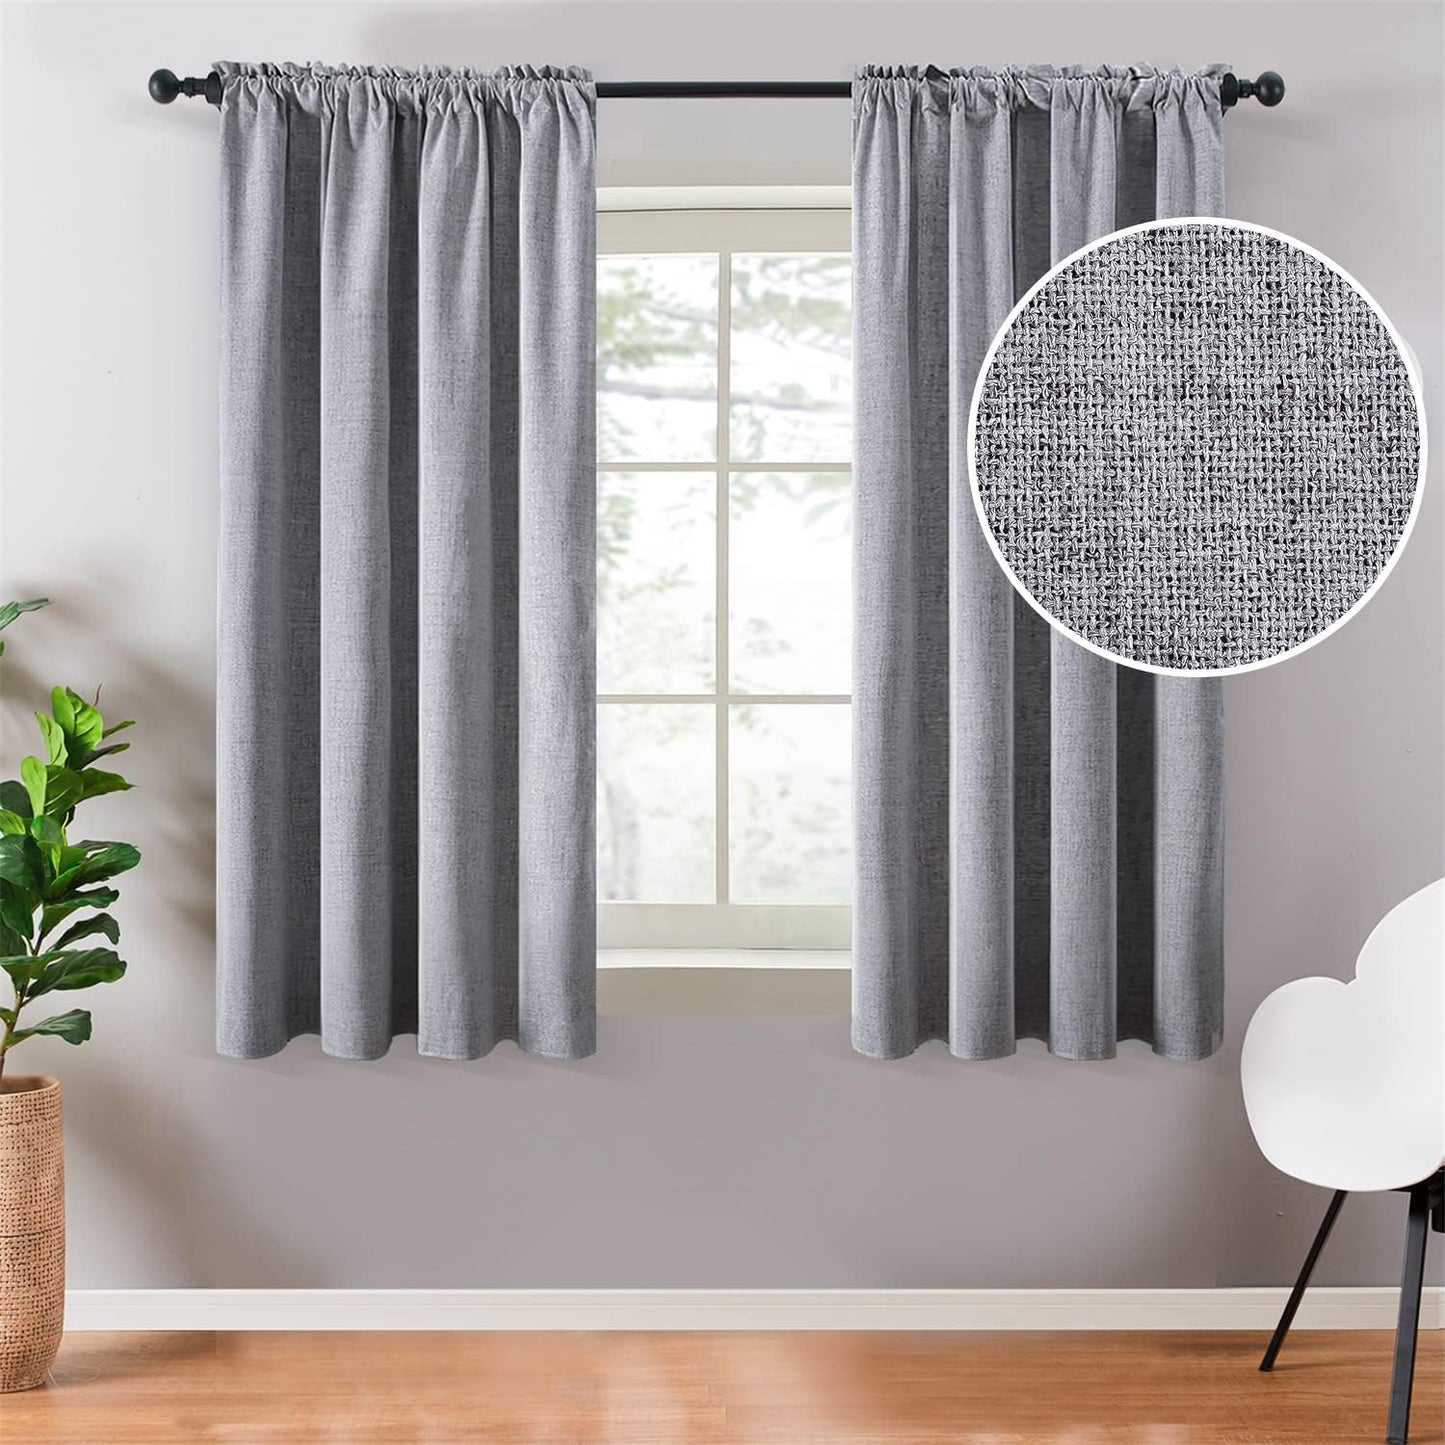 Topfinel Blackout Curtains,Linen 100% Black Out Curtains for Bedroom,Textured Thermal Insulated Window Curtains Drapes for Living Room 84 Inch Rod Pocket,Energy Efficient Curtains,2 Panels Set,Natural  Top Fine Grey 52'' X 45'' 